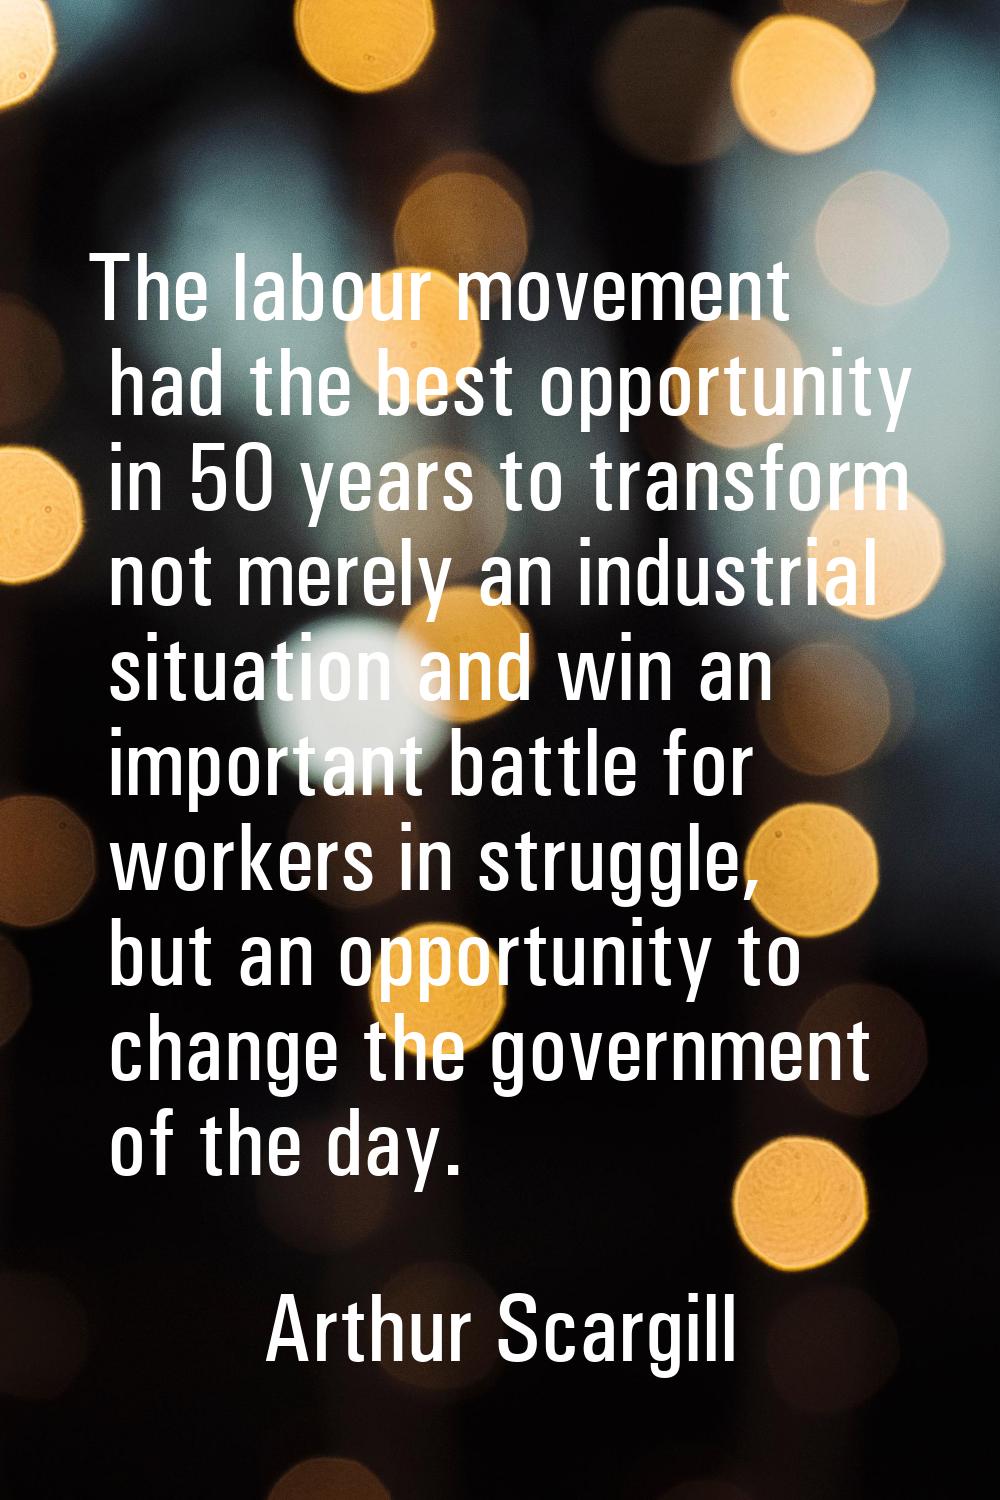 The labour movement had the best opportunity in 50 years to transform not merely an industrial situ